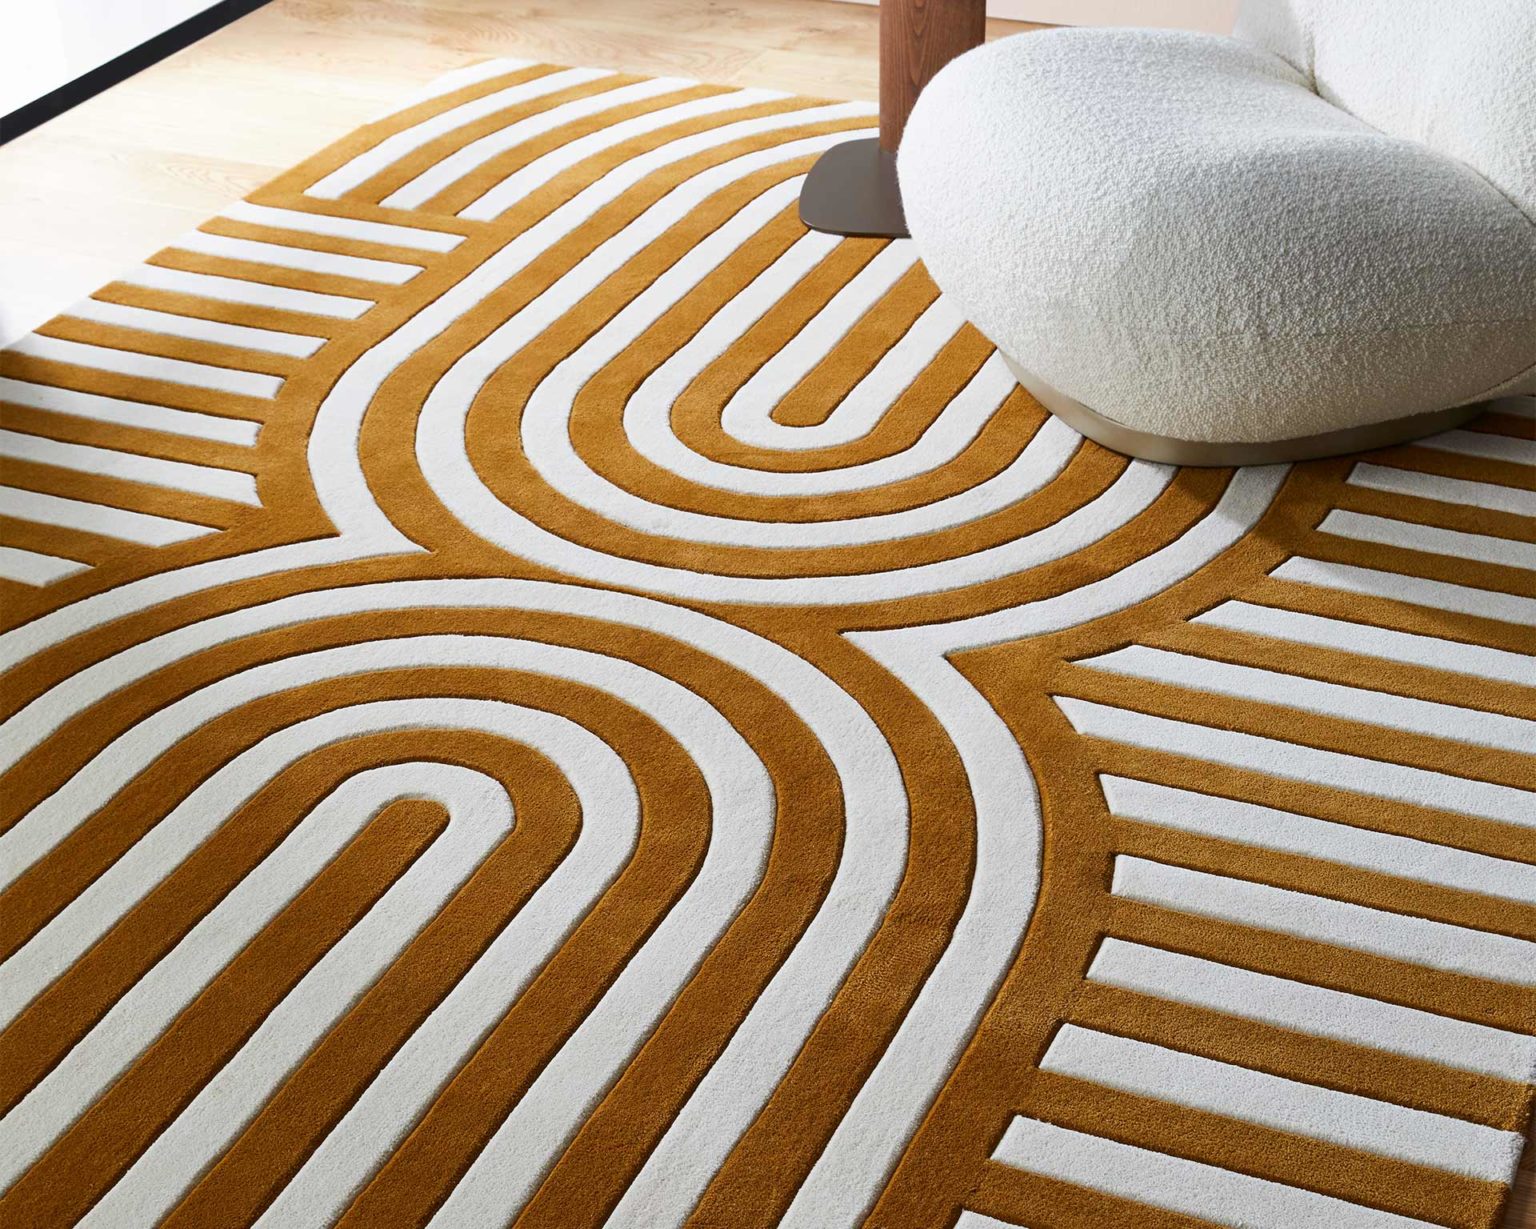 Floor Rugs: Which Type To Choose?